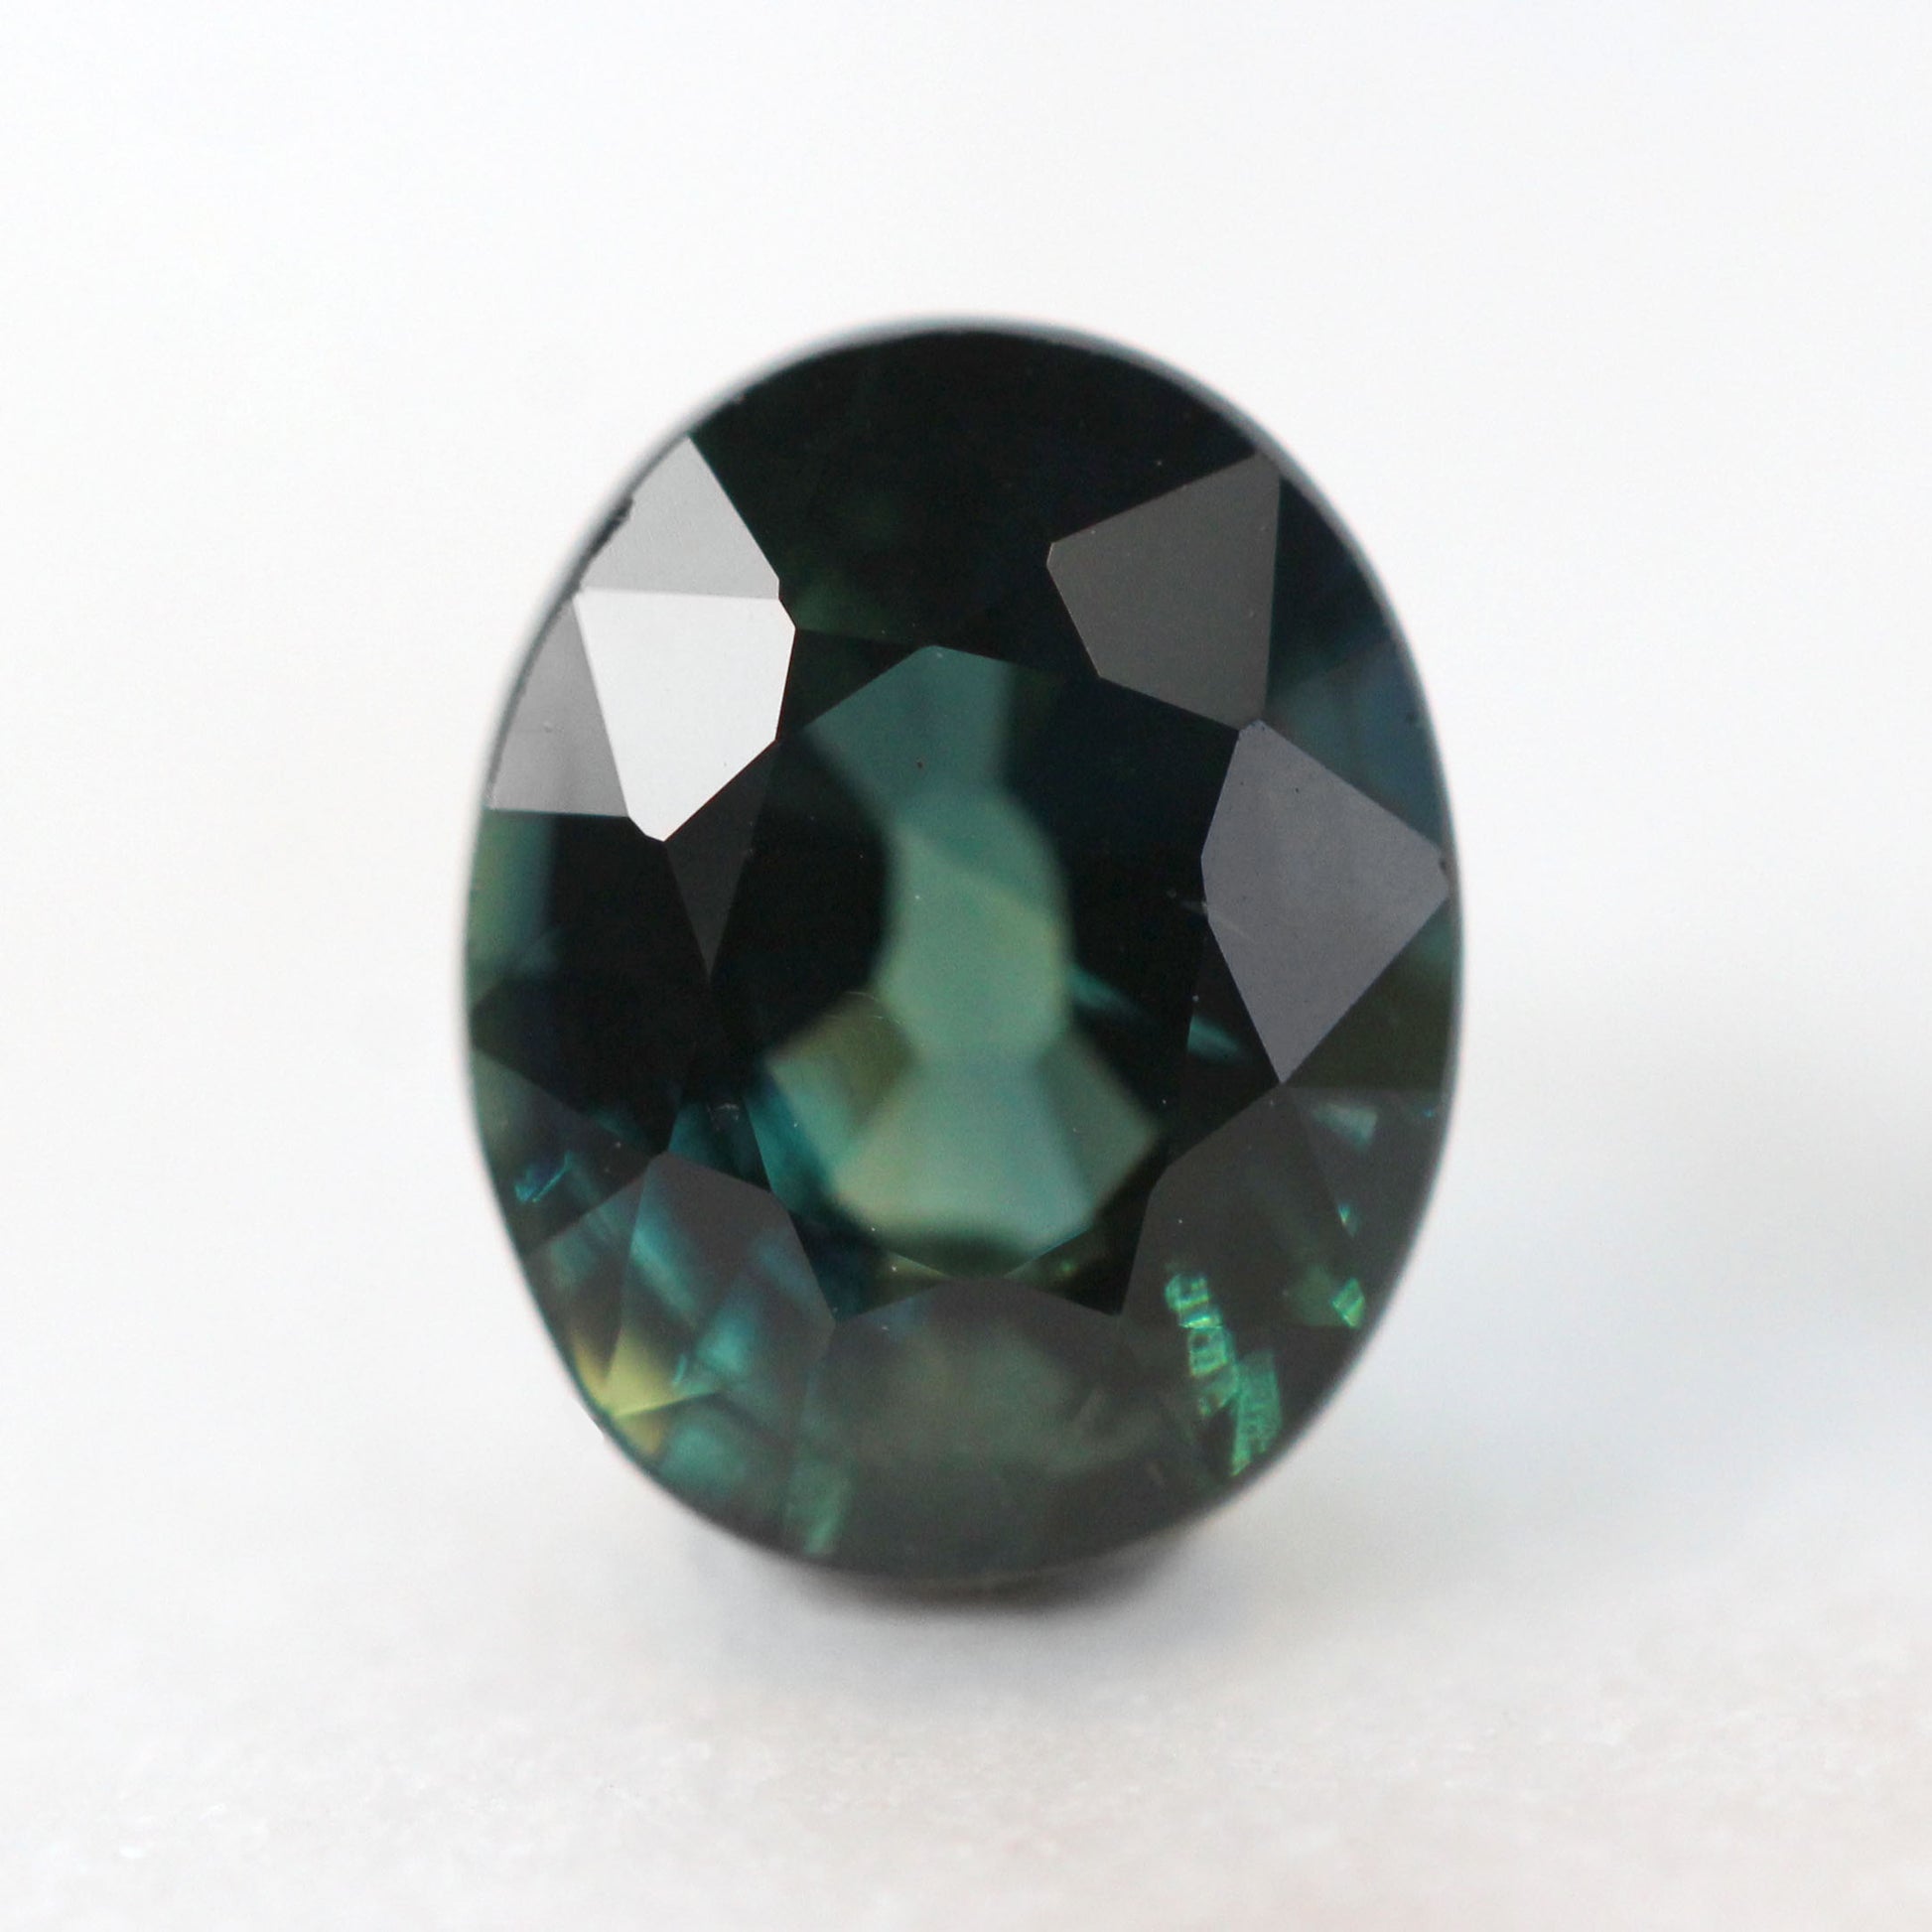 1.11 Carat Dark Teal Oval Australian Sapphire for Custom Work - Inventory Code TOS111 - Midwinter Co. Alternative Bridal Rings and Modern Fine Jewelry